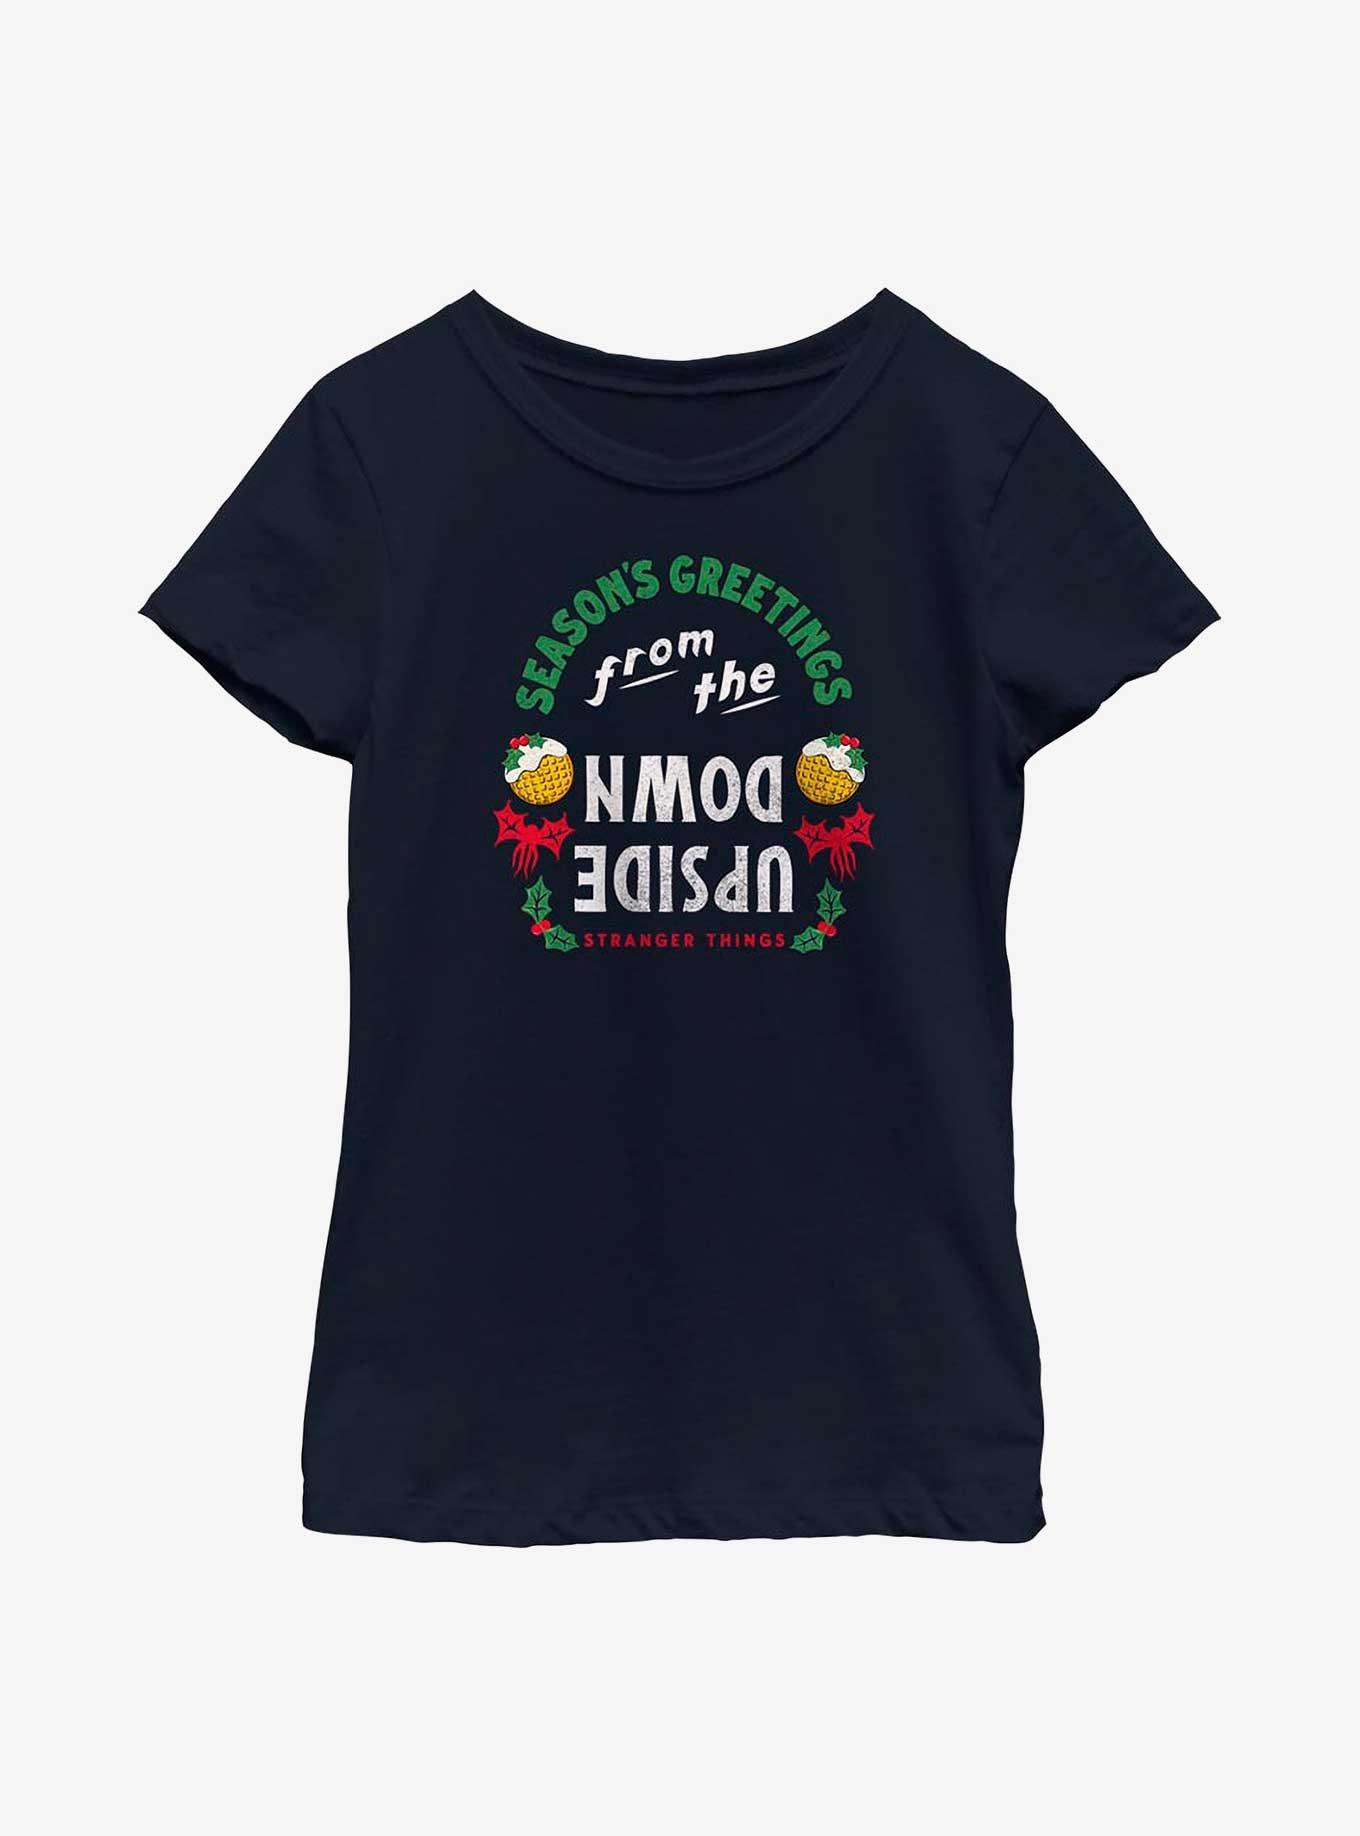 Stranger Things Greetings From The Upside Down Youth Girls T-Shirt, NAVY, hi-res